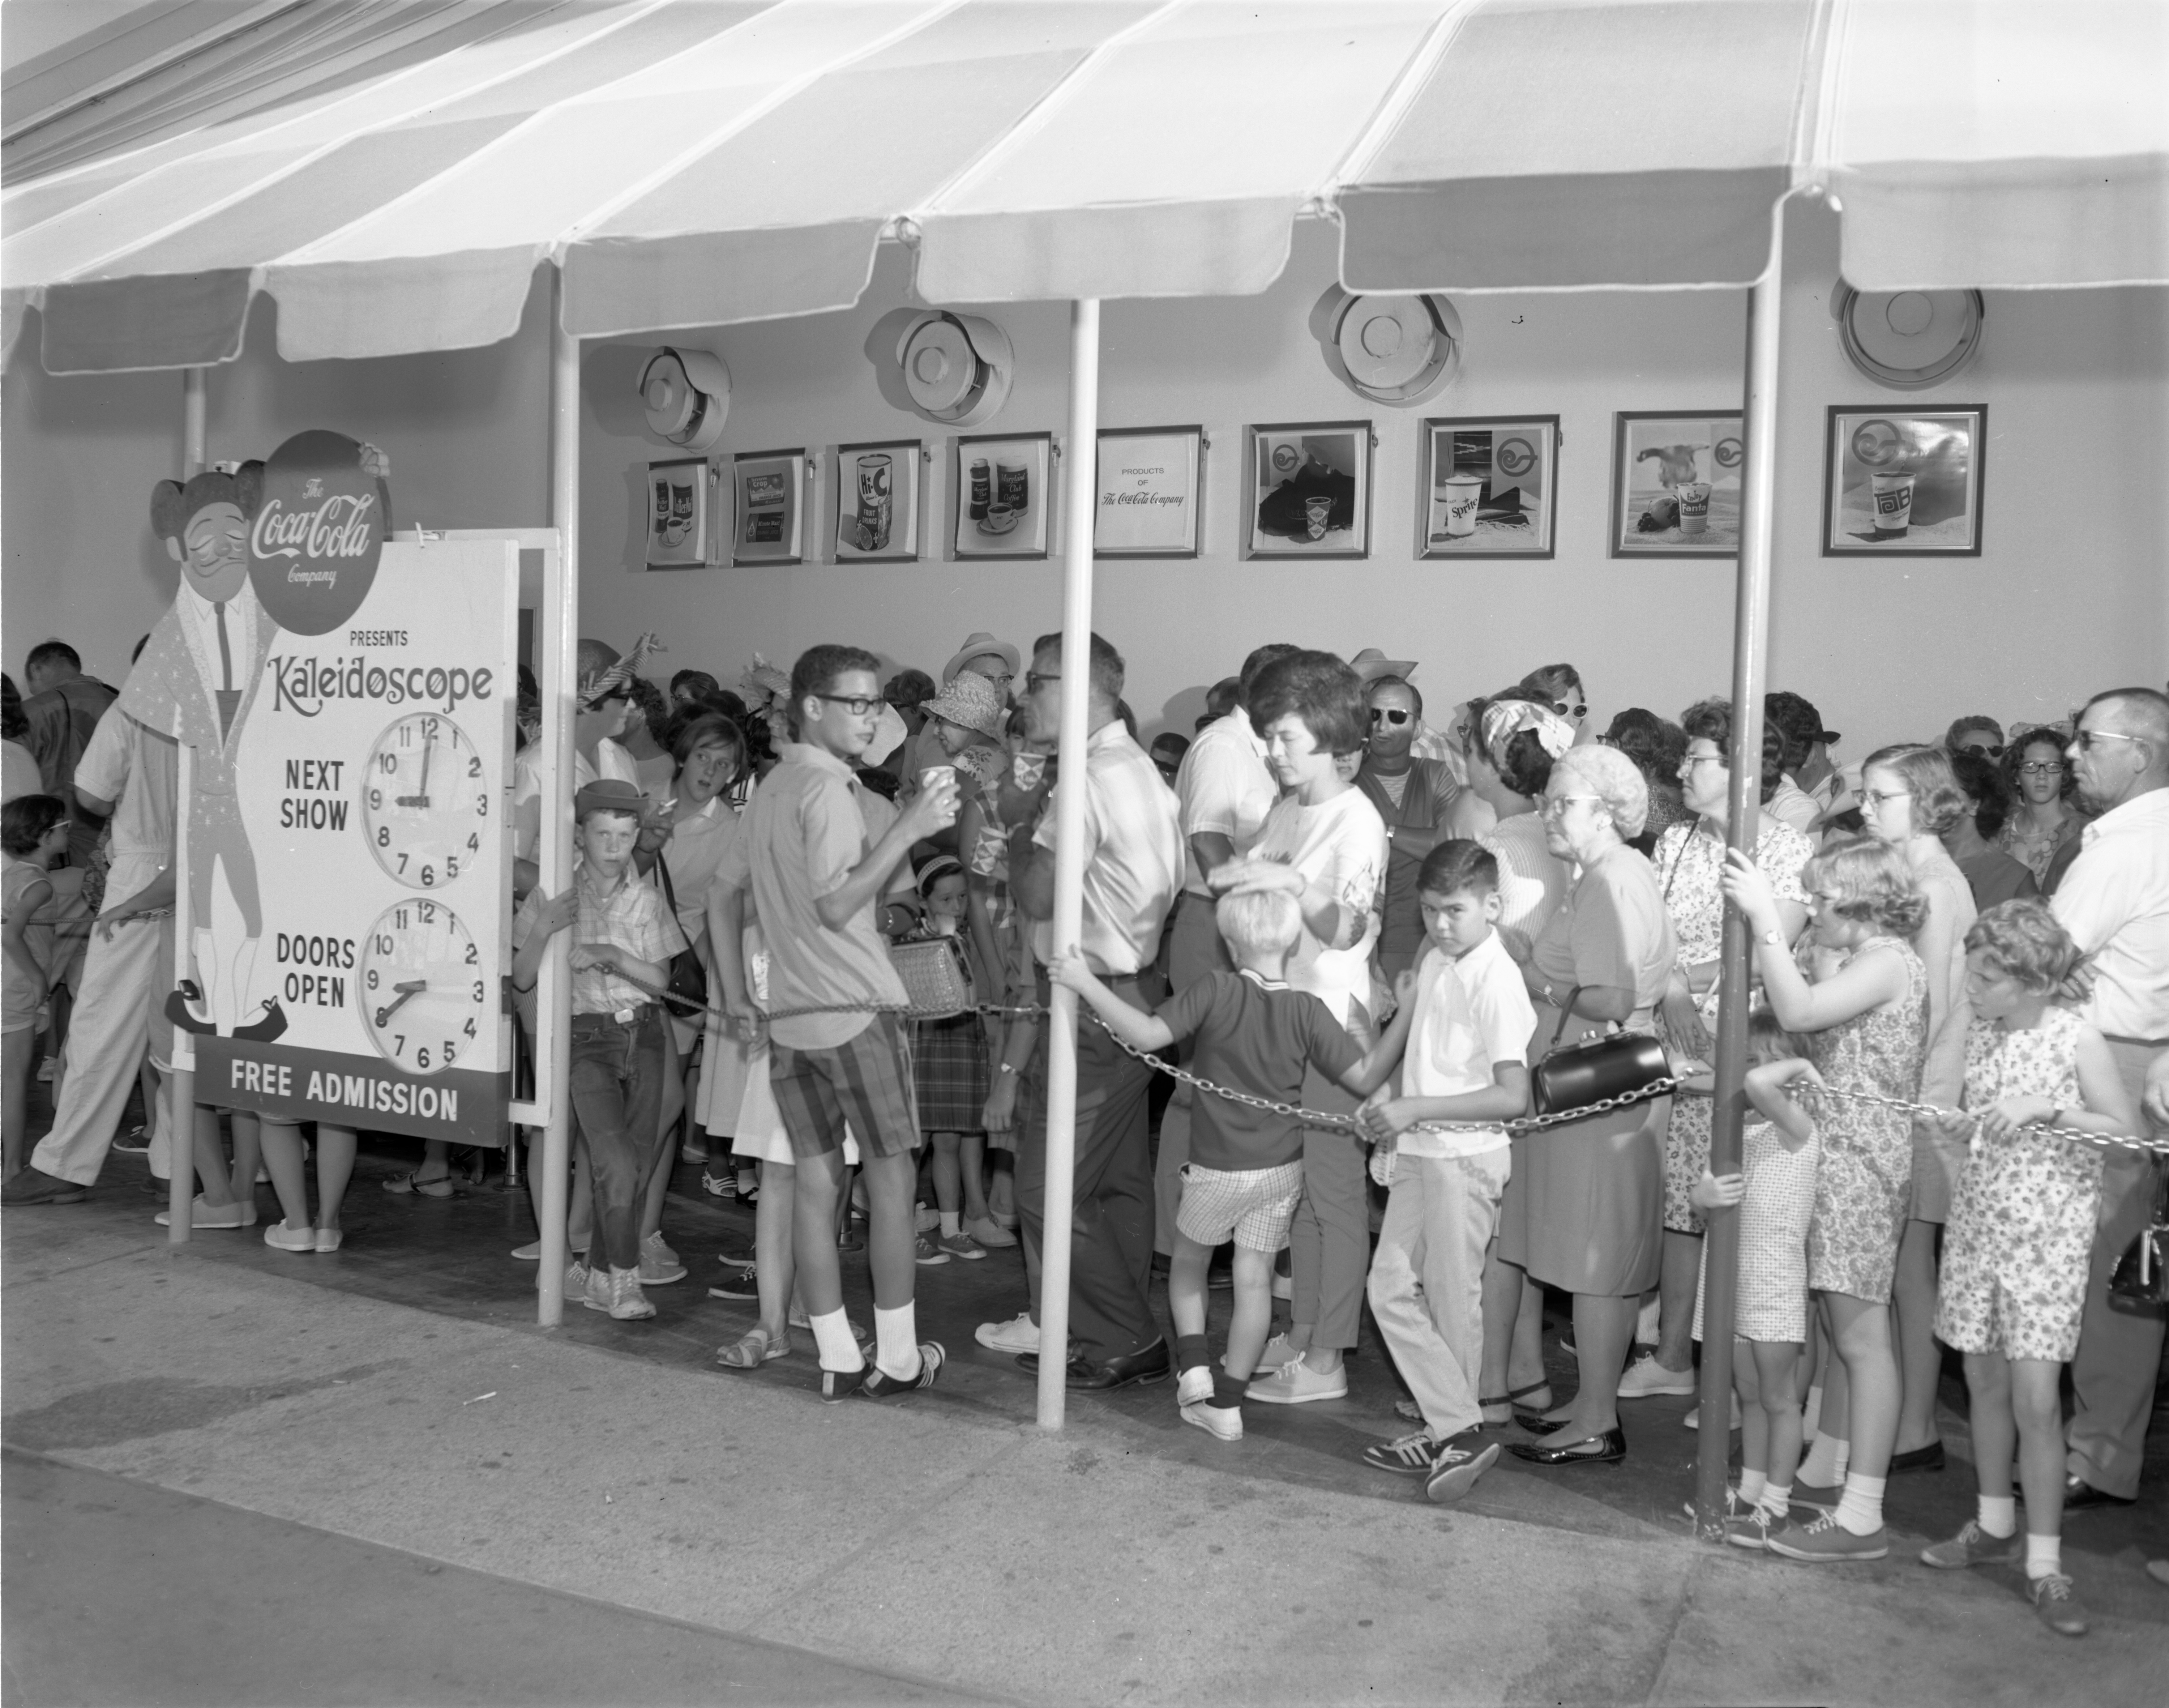 Black and white photograph of the audience line for the 9 a.m. performance of the Sid and Marty Krofft puppet show "Kaleidoscope"